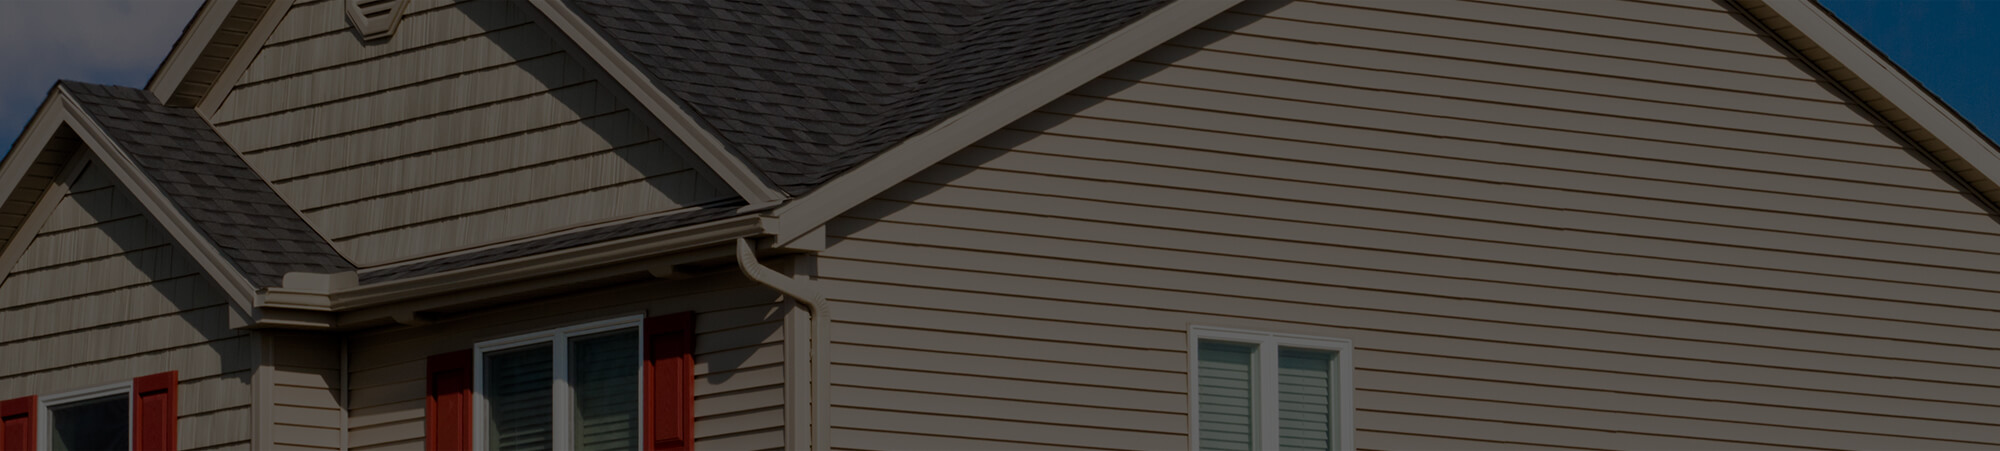 siding installation and replacement in appleton wi